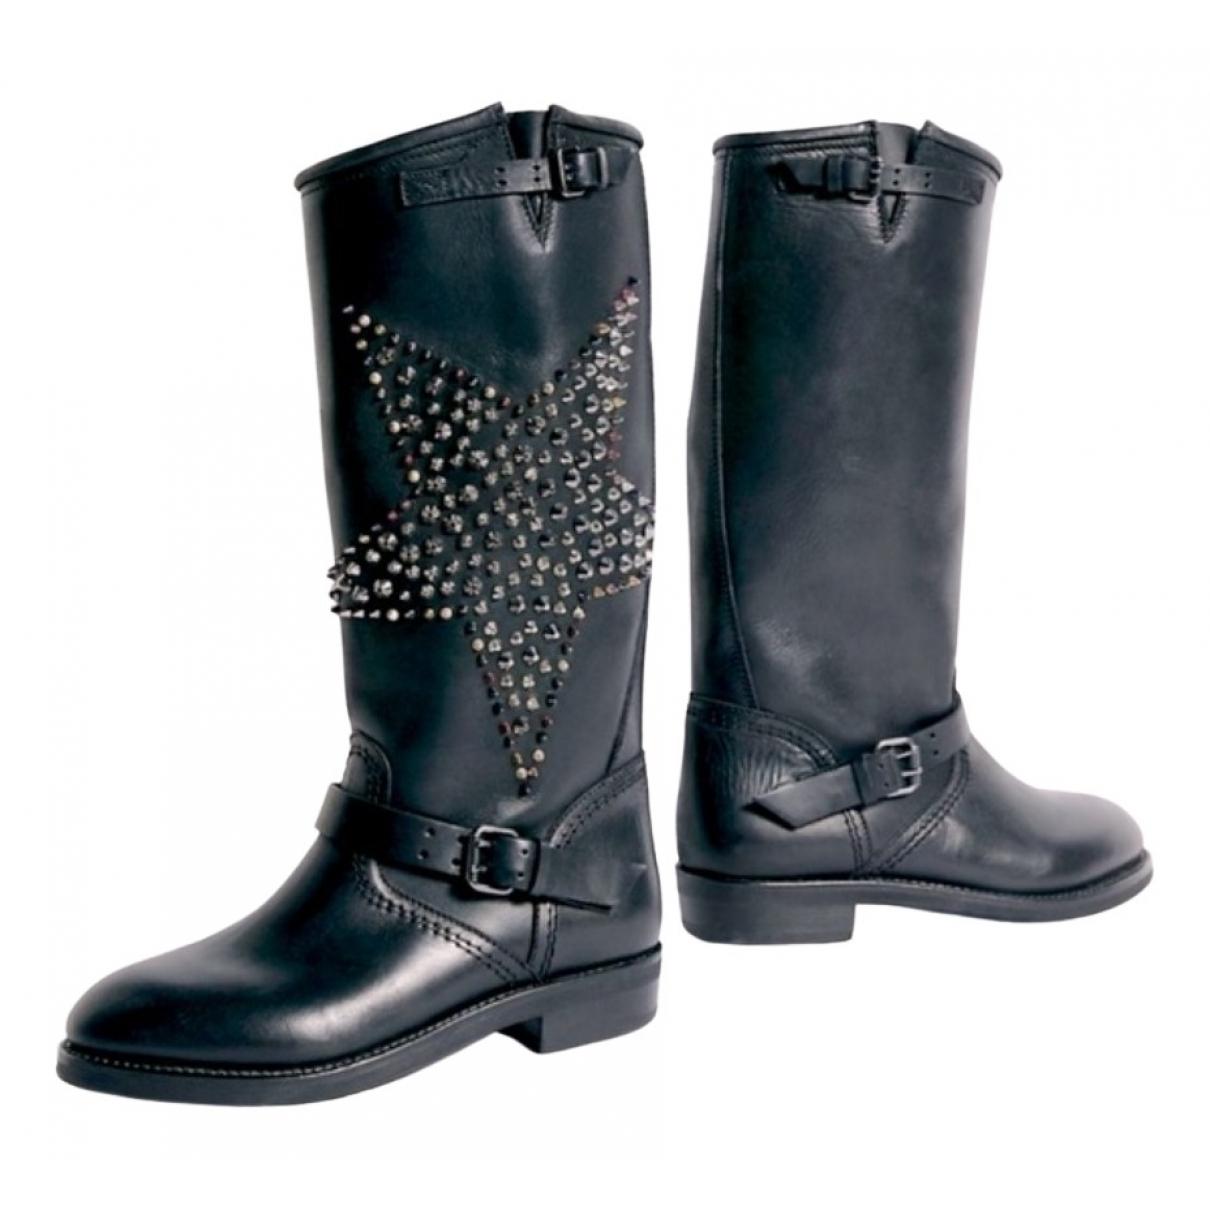 Leather riding boots Free People